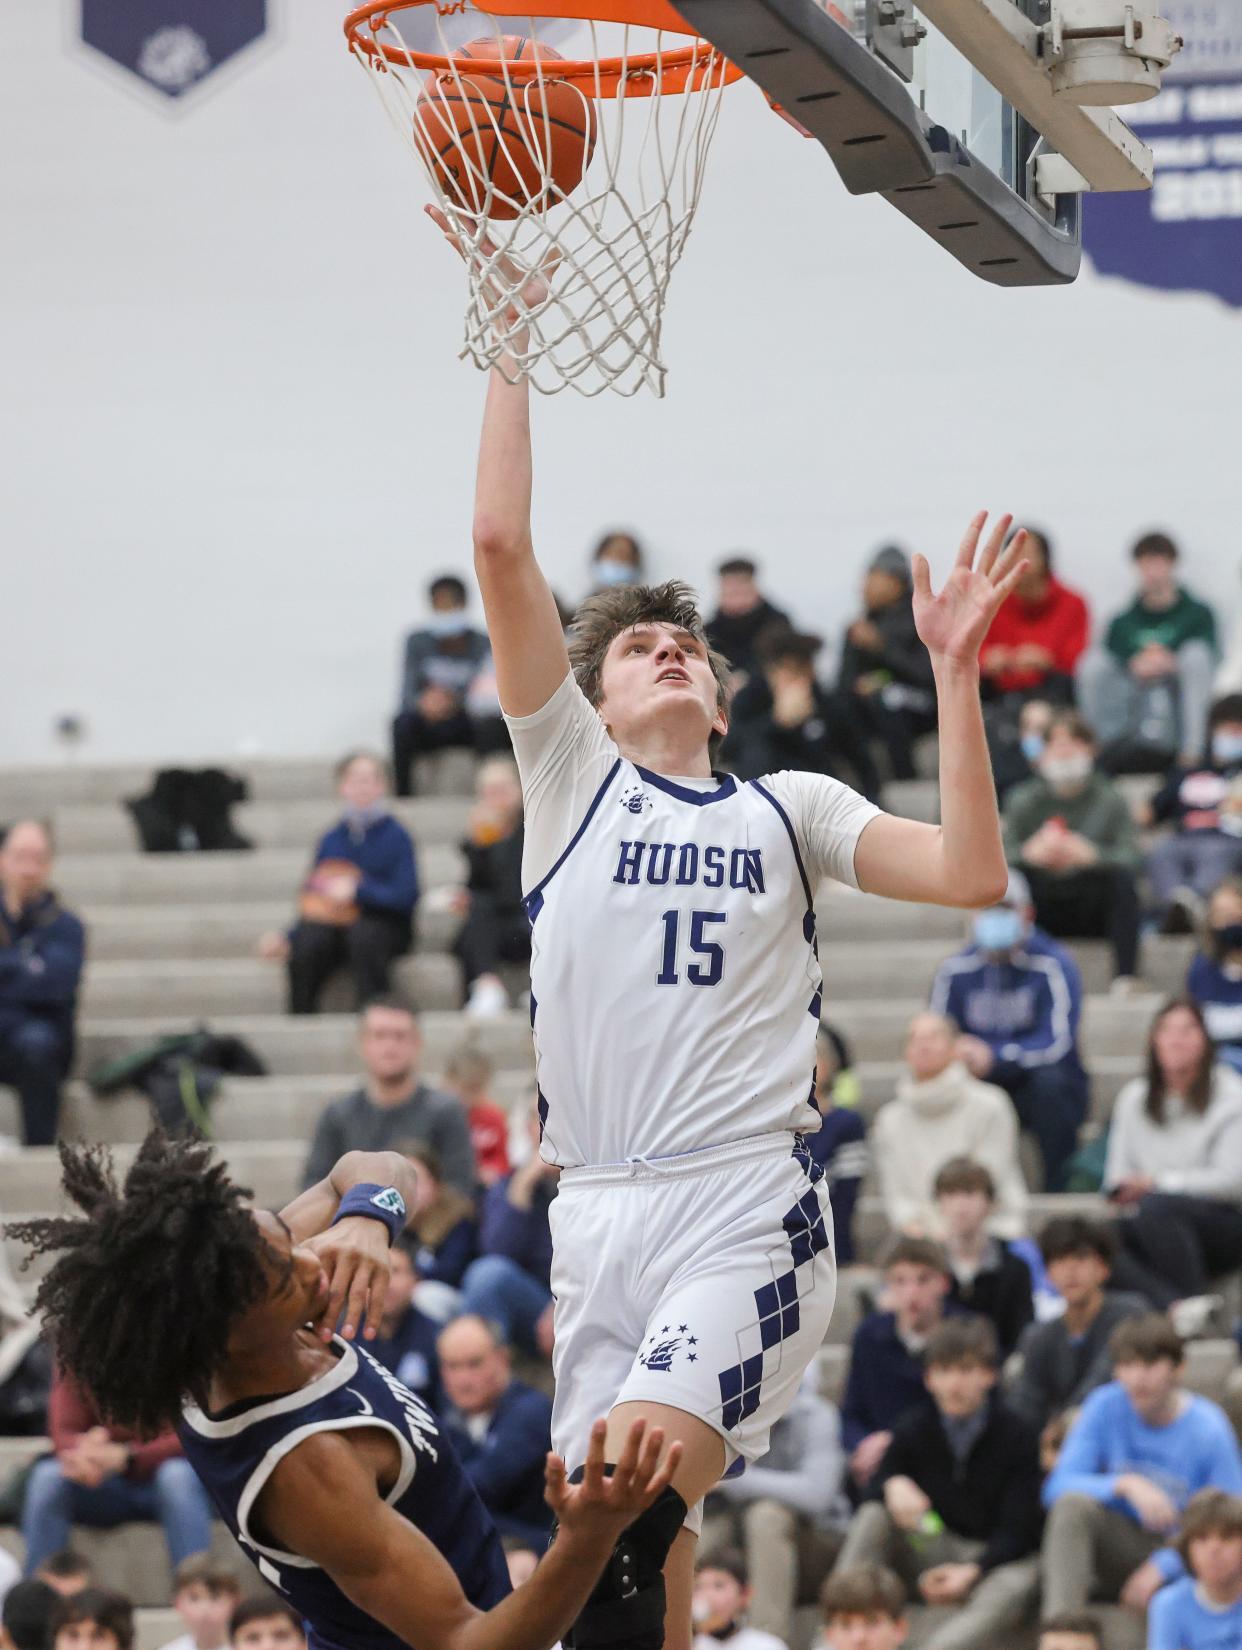 Hudson's Michael Steel puts up a shot during a game against Twinsburg last season